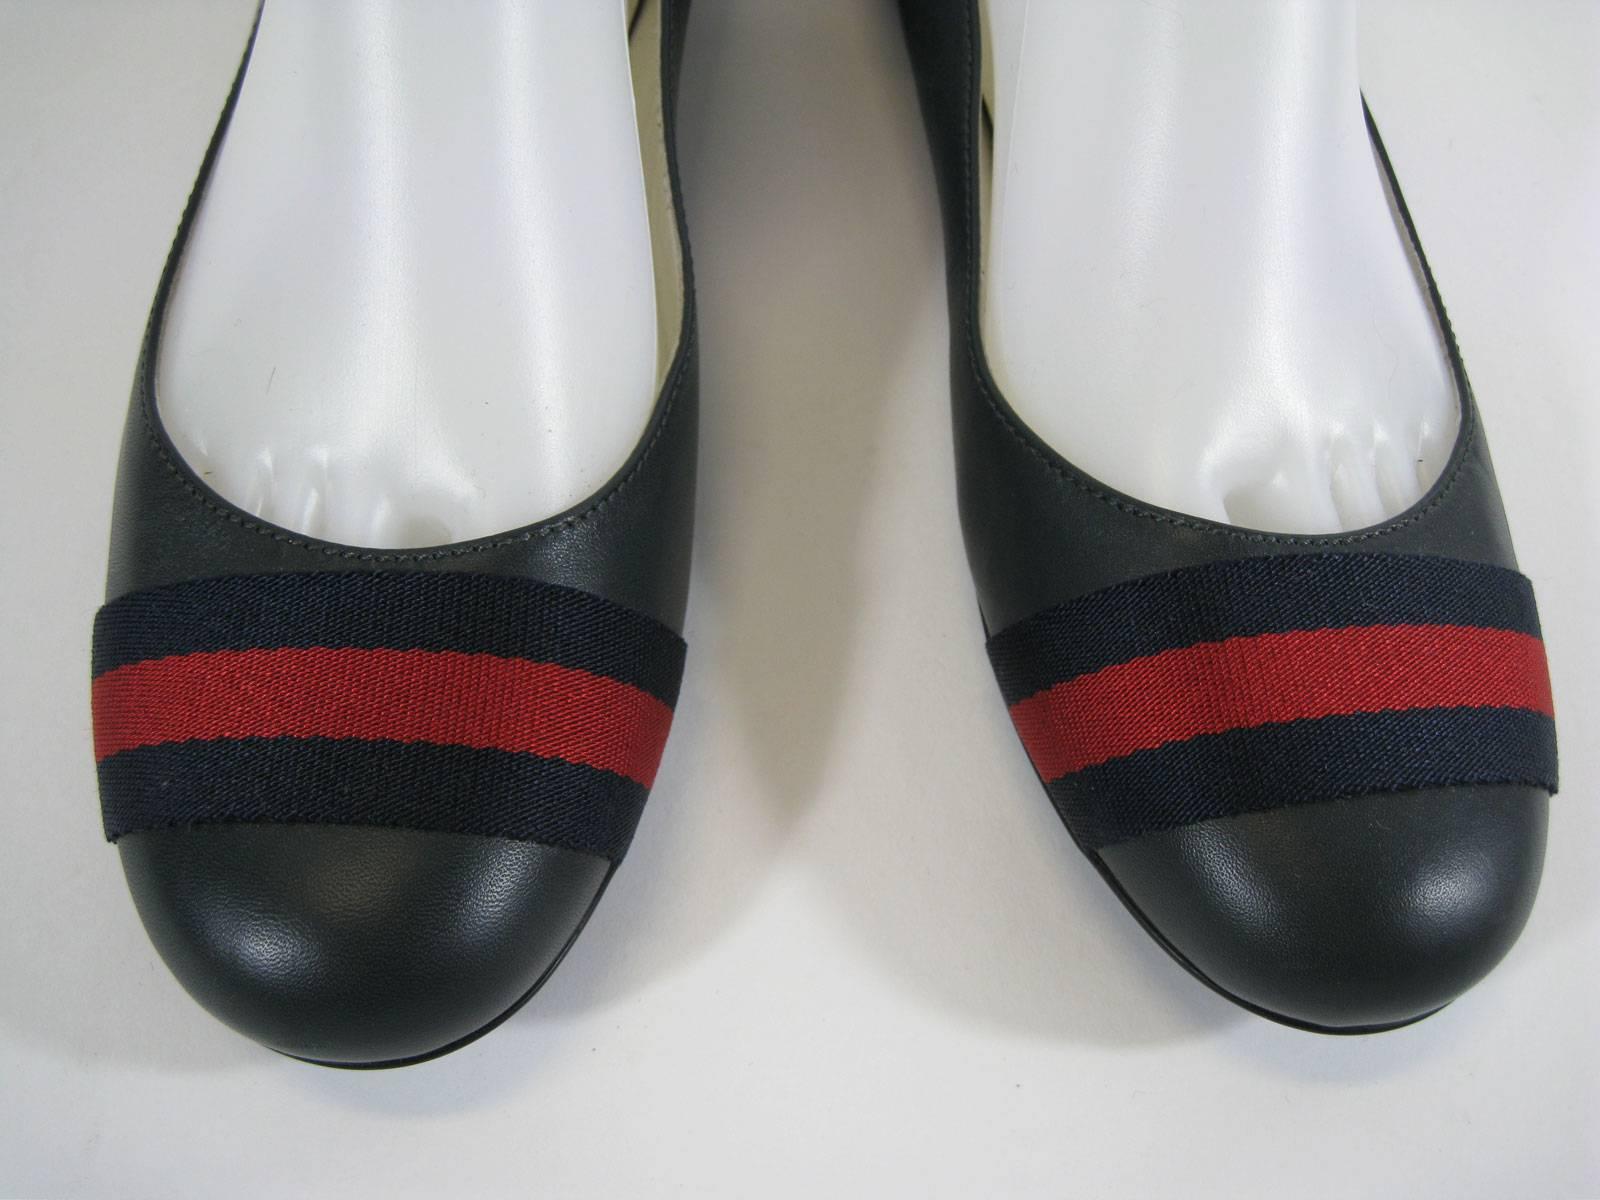 Navy blue leather Gucci flats.
Navy and red ribbon trim on round toes.
Flexible soles.
Marked a size 36 1/2.
